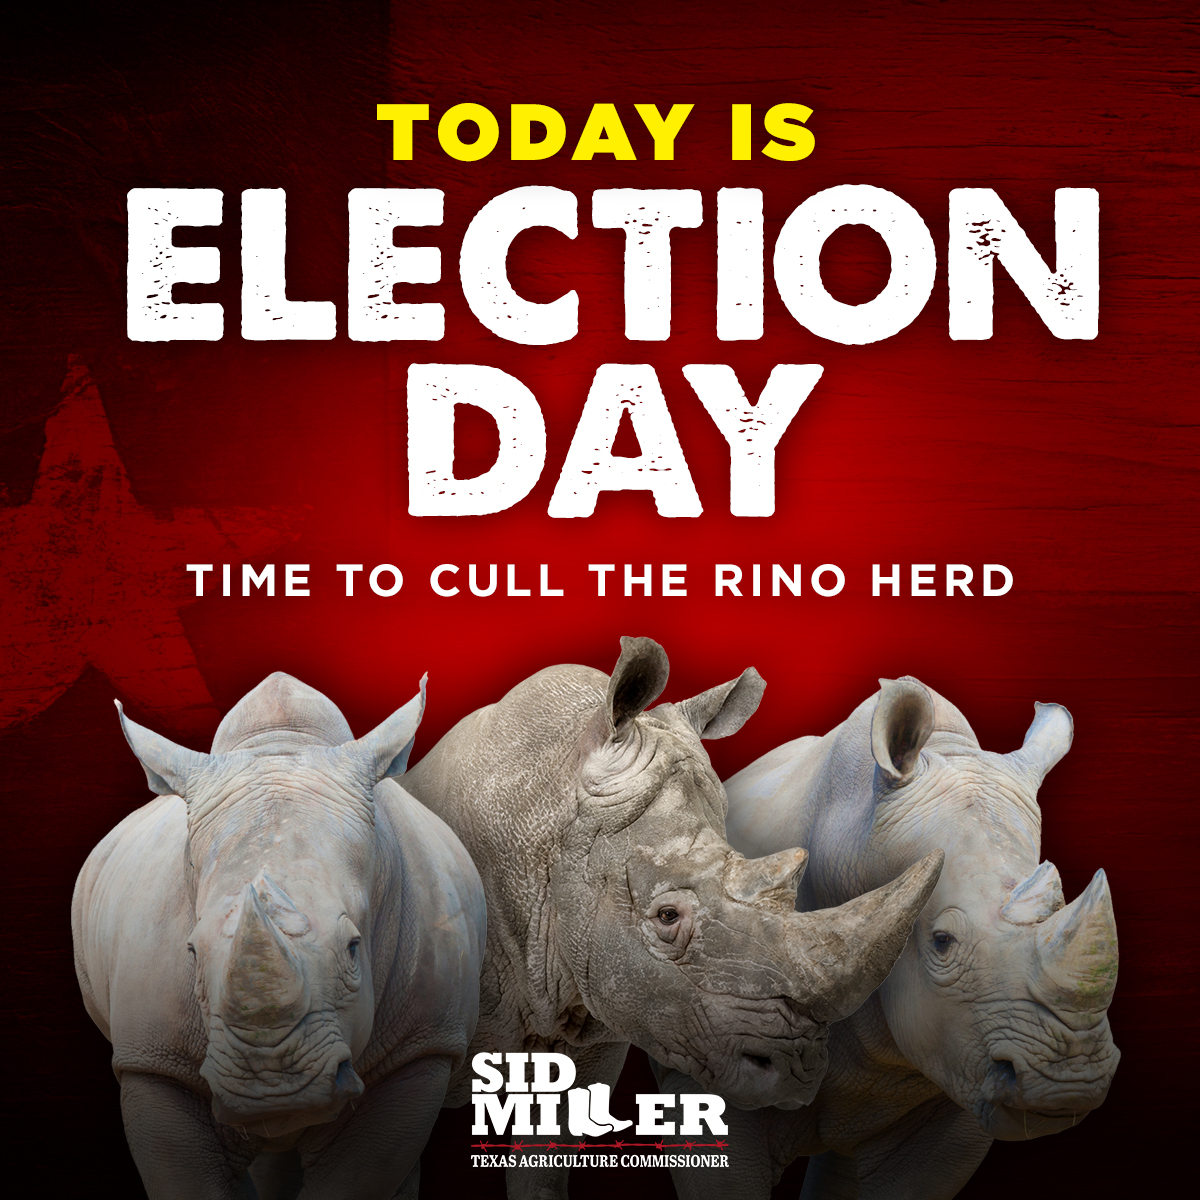 This is it! Get out and vote. Polls are open until 7. Find my polling place: votetexas.gov